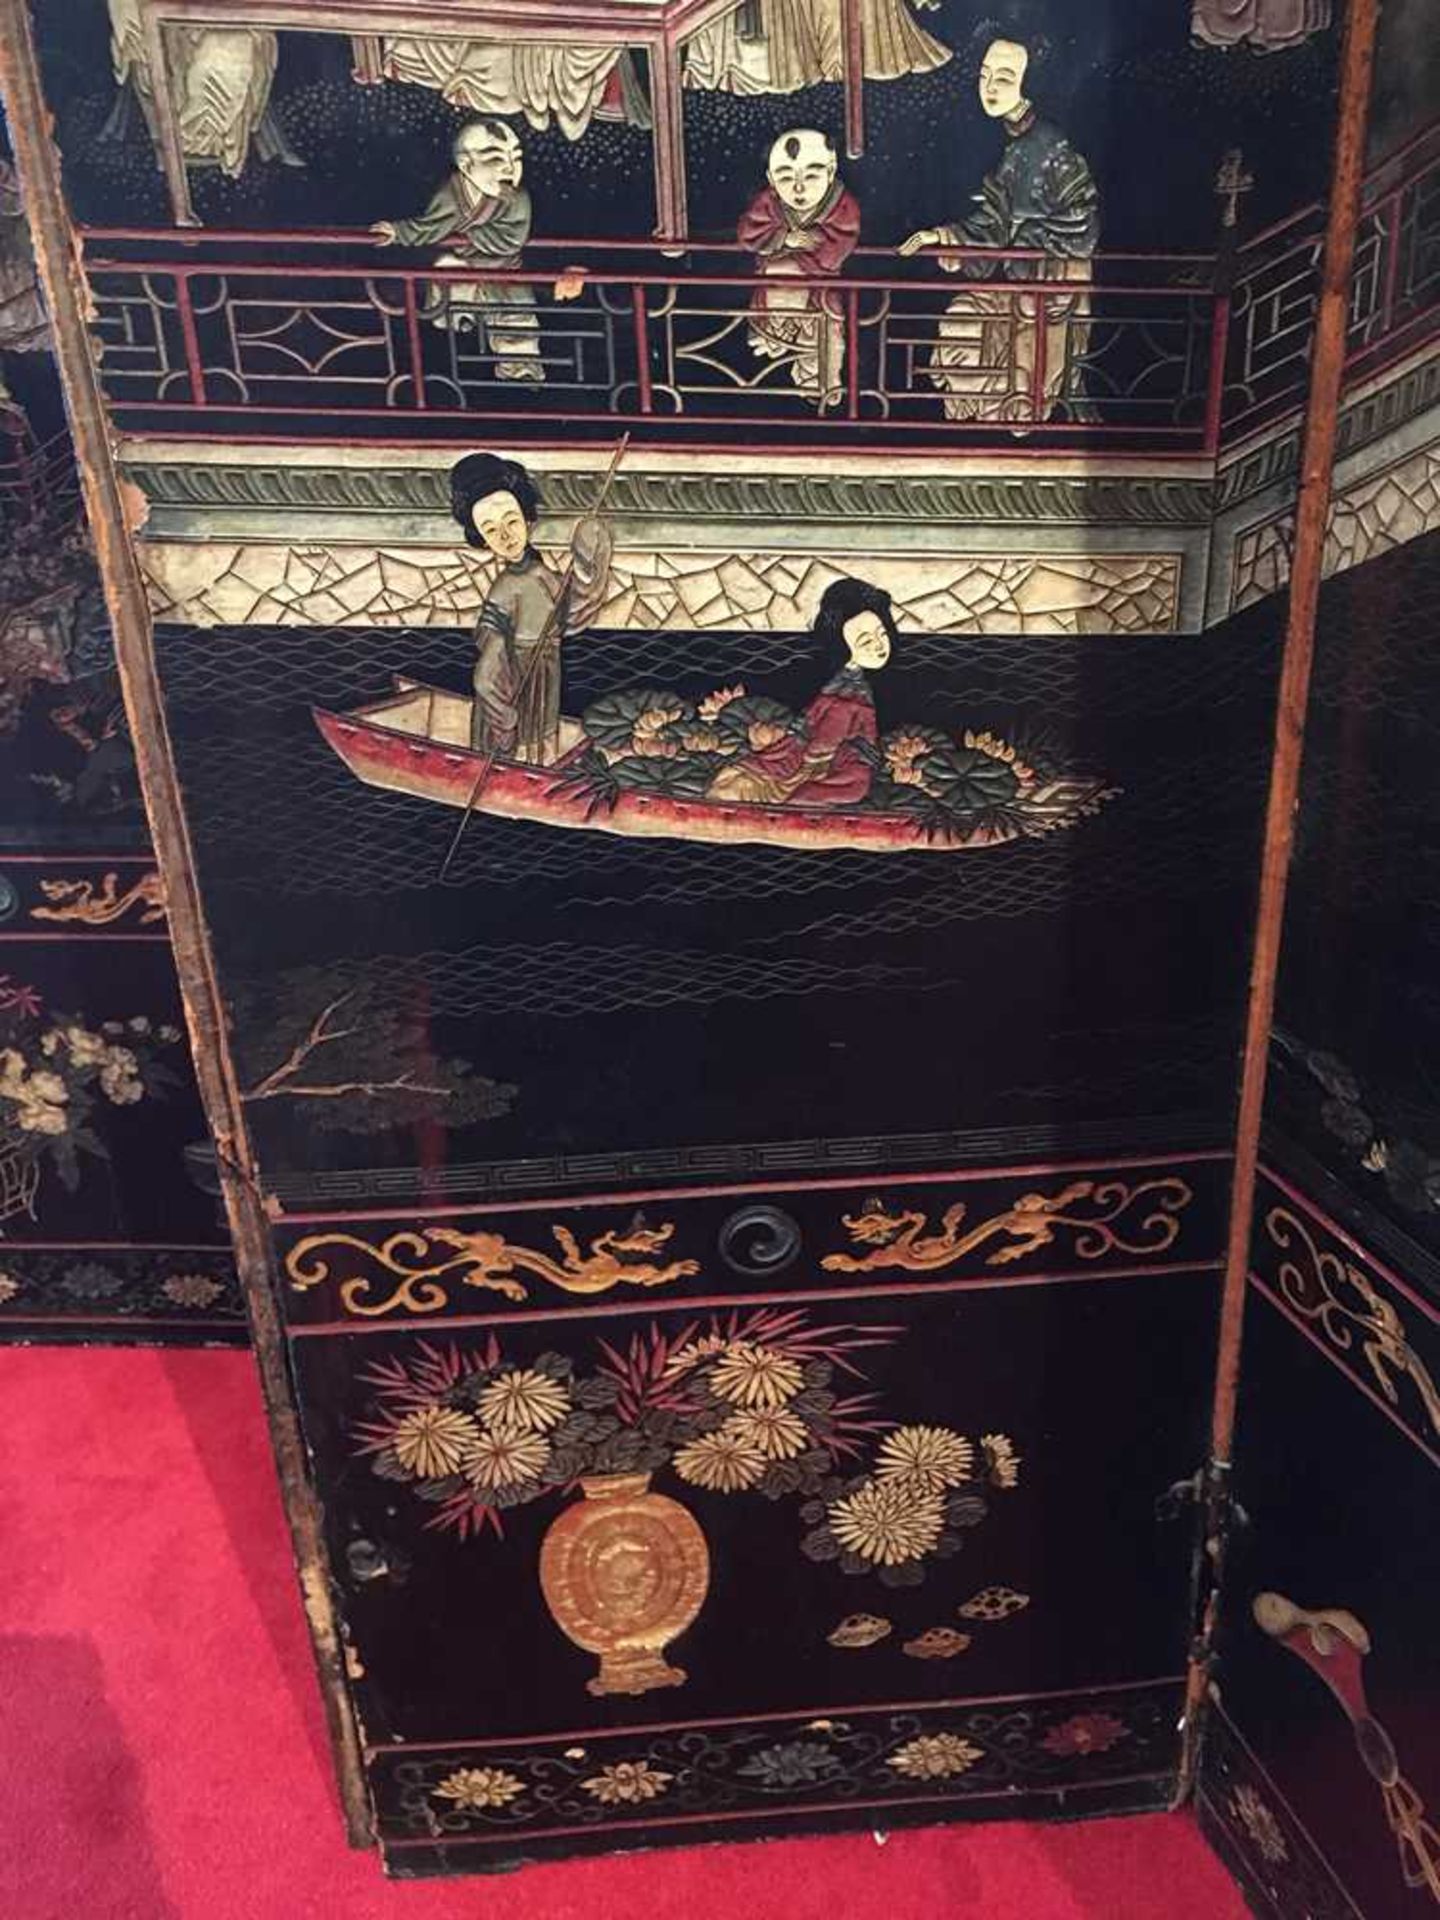 A CHINESE COROMANDEL BLACK LACQUER TWELVE-PANEL SCREEN QING DYNASTY, 18TH CENTURY - Image 31 of 72